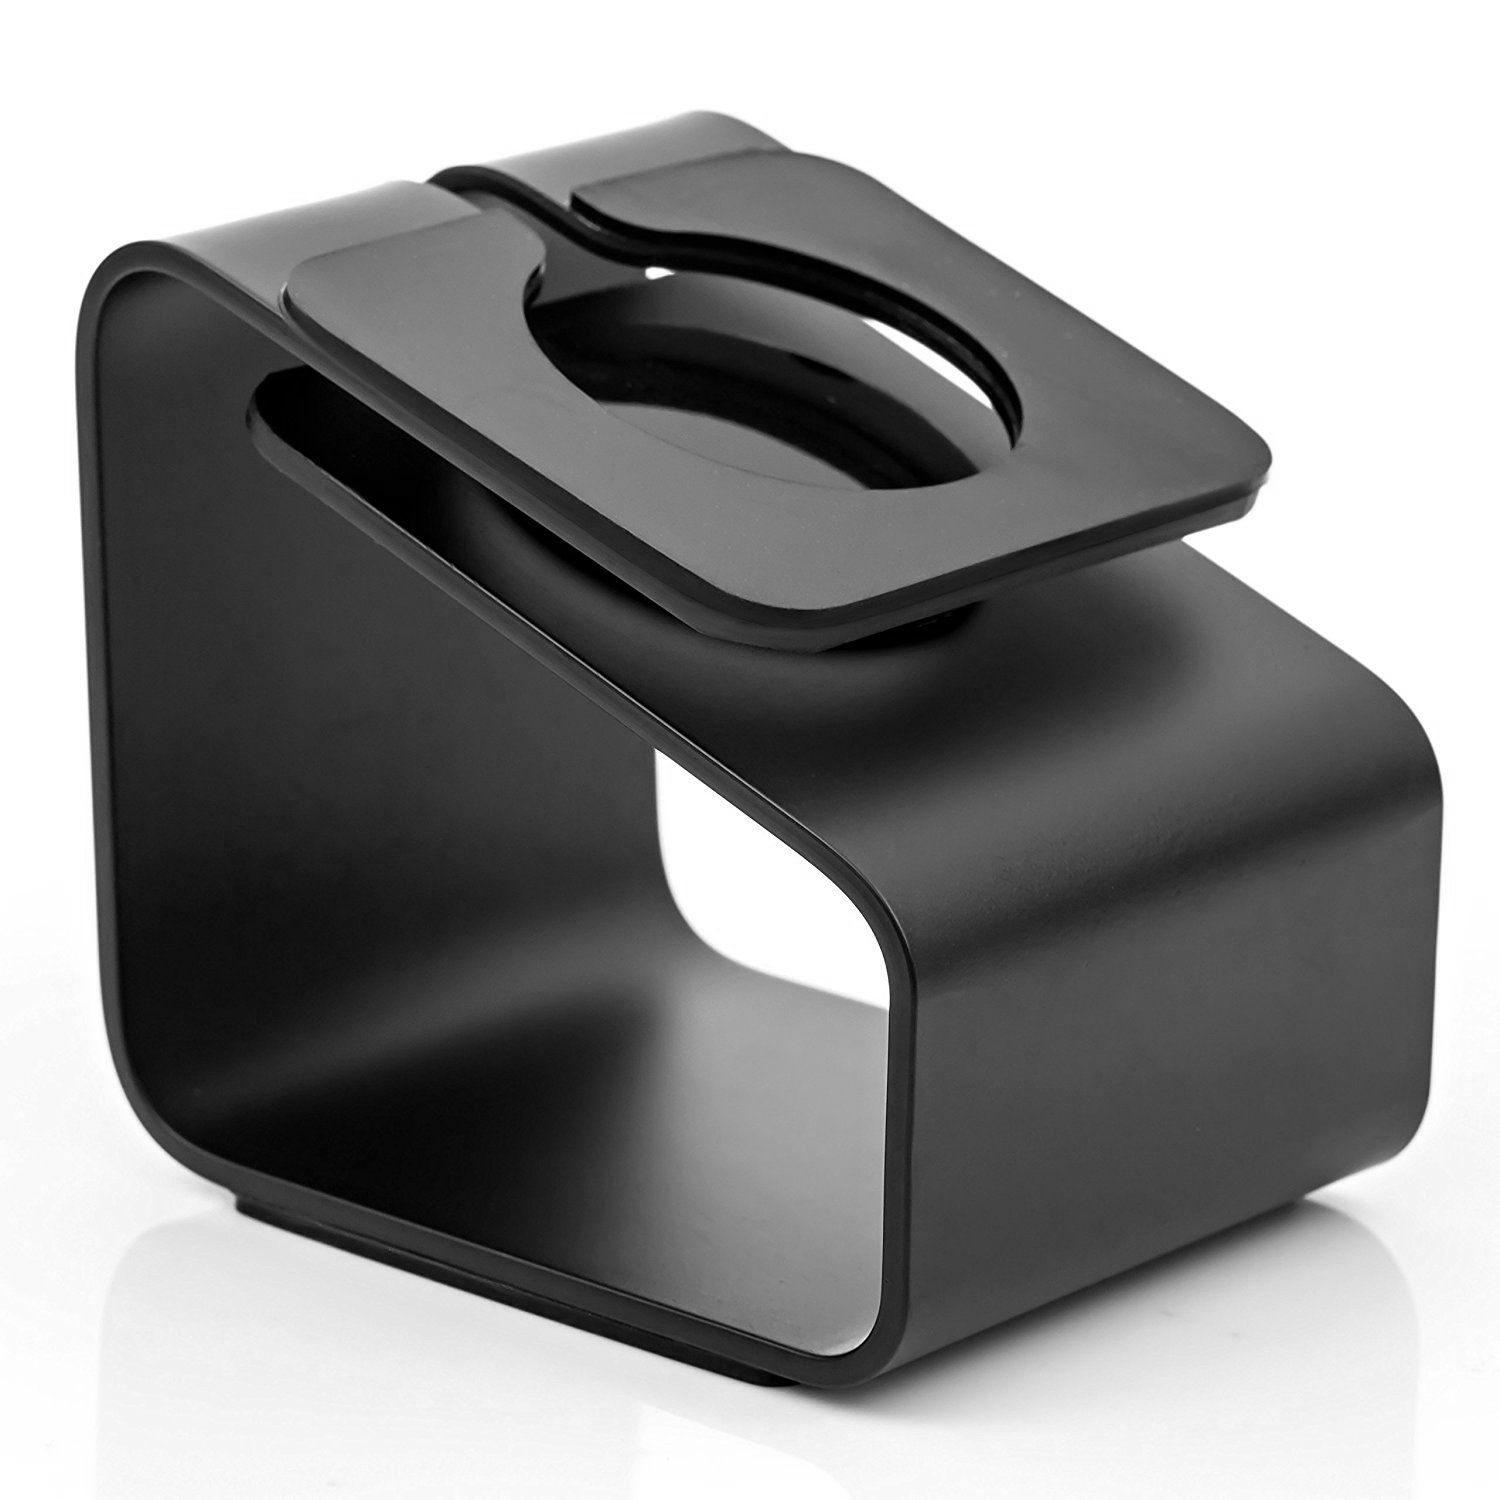 Aluminum Metal Charging Stand Docking Station Holder for Apple Watch iWatch - Black